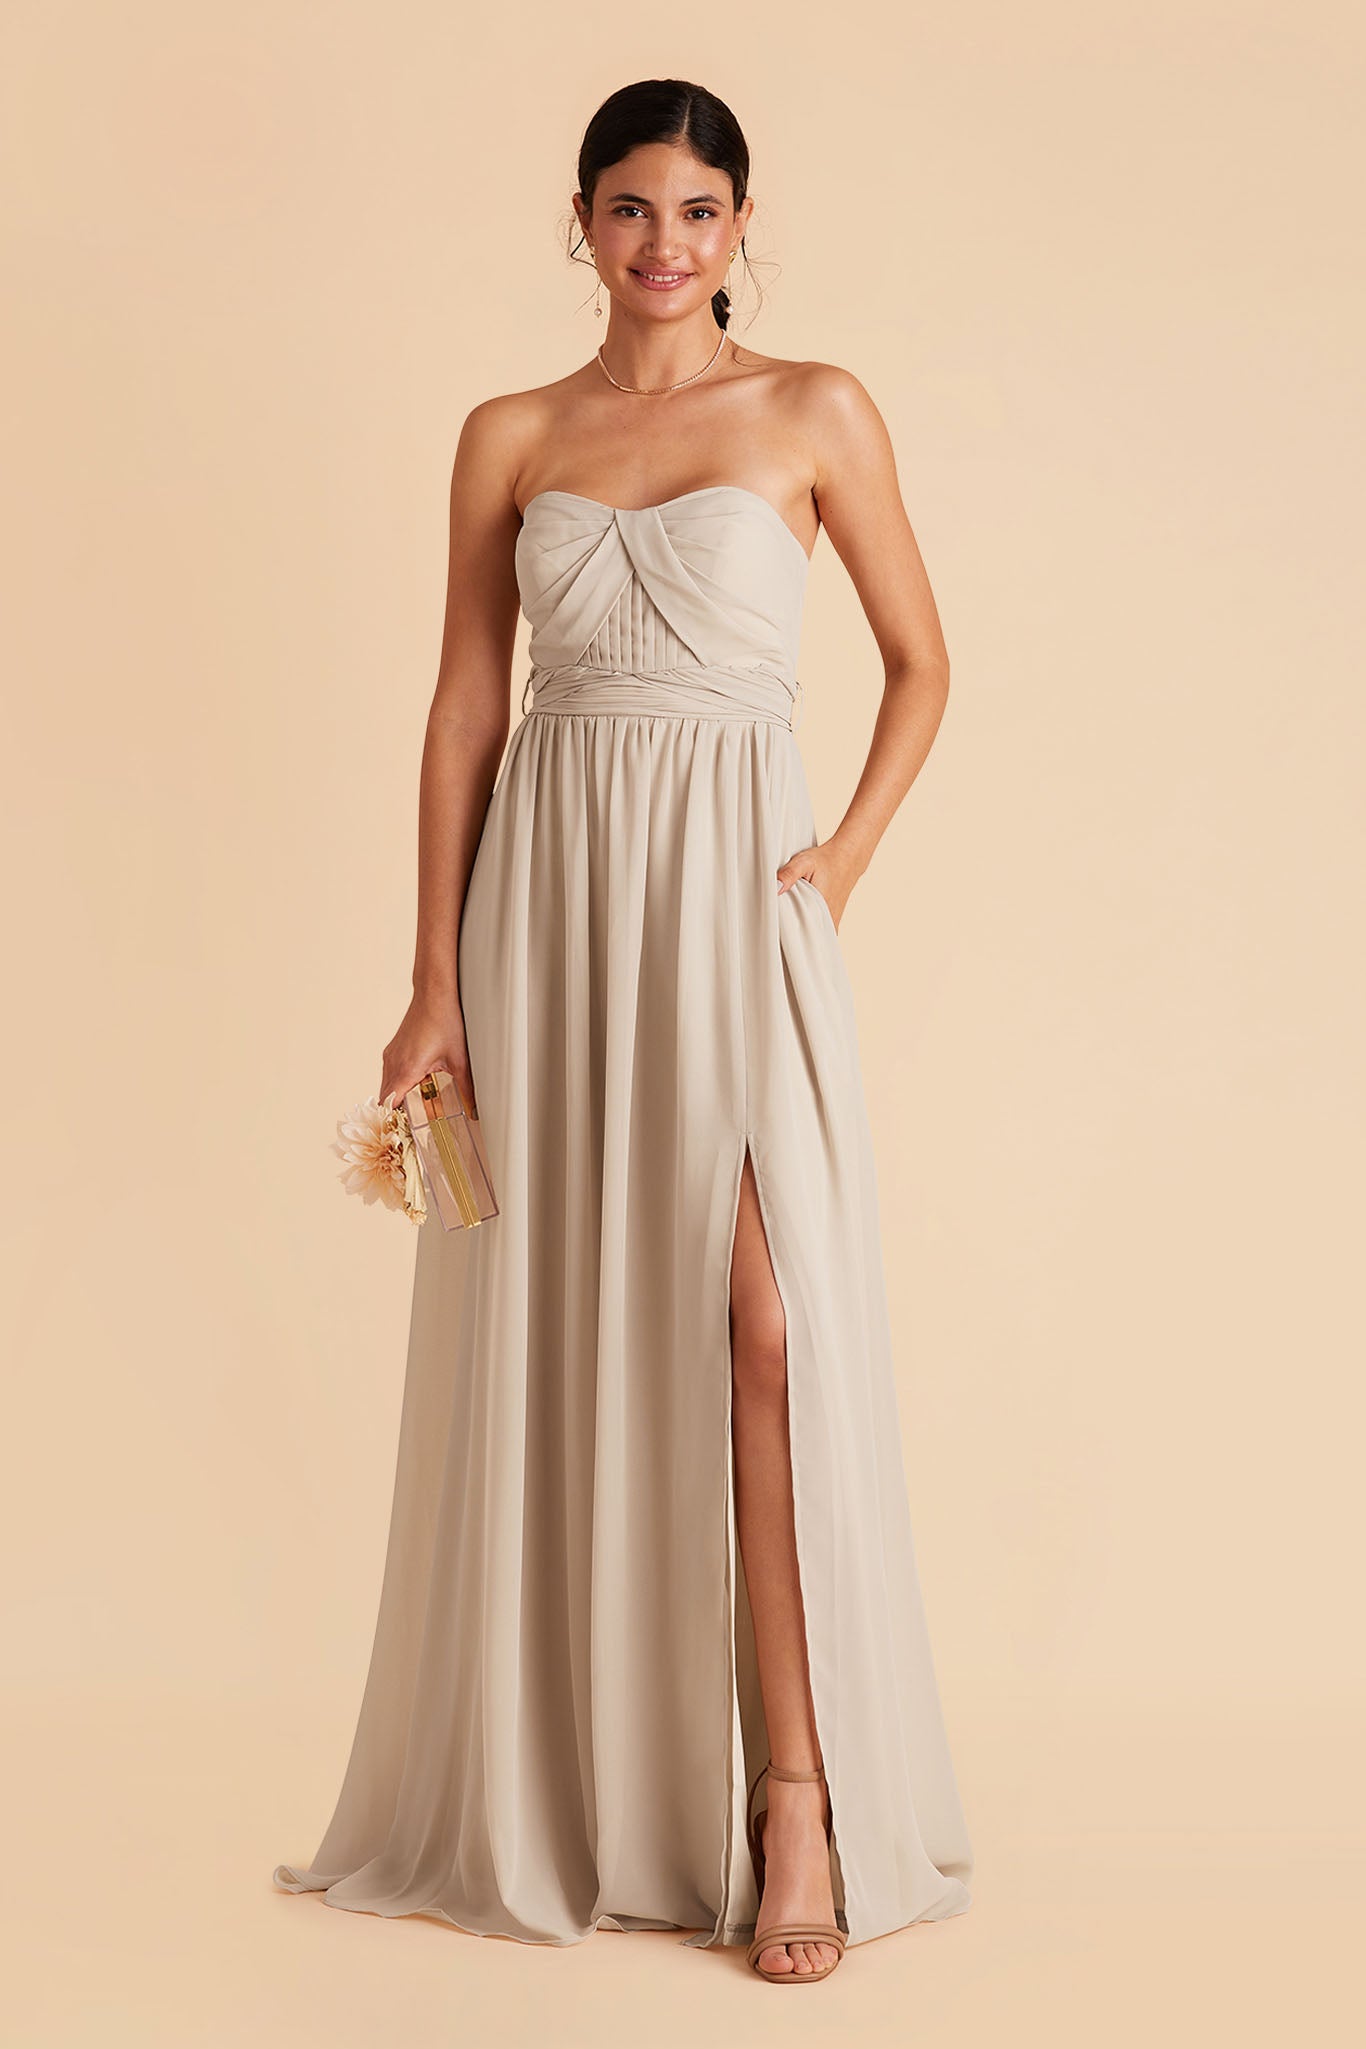 Grace convertible bridesmaid dress in Neutral Champagne Chiffon by Birdy Grey, front view